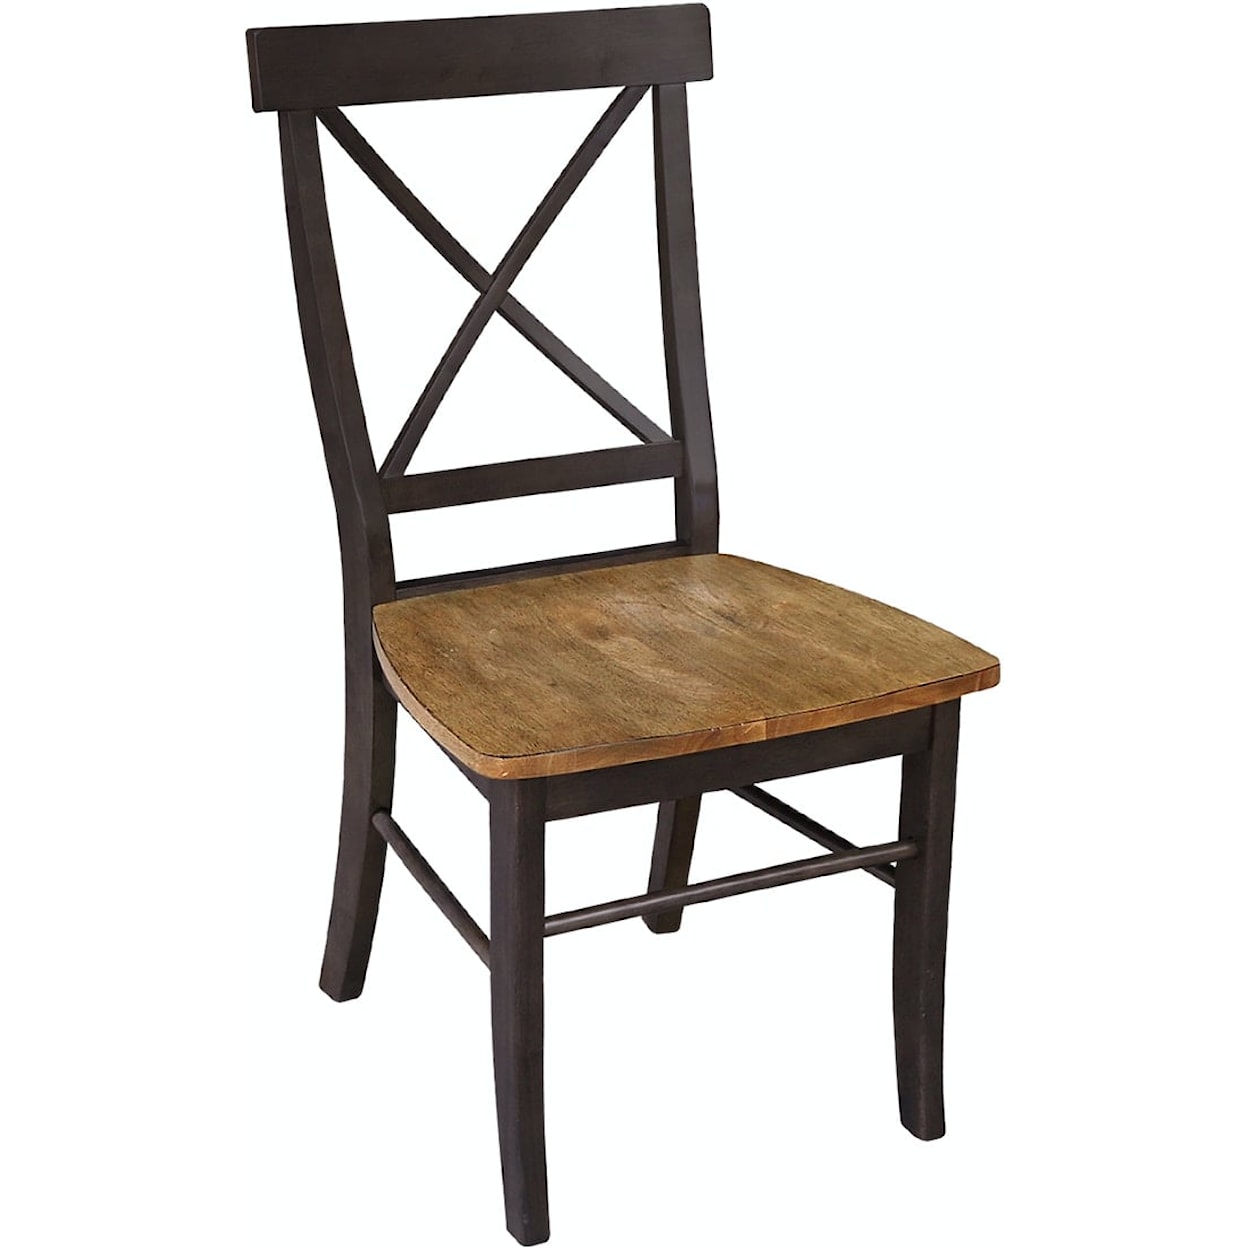 John Thomas Dining Essentials X Back Chair in Hickory / Coal